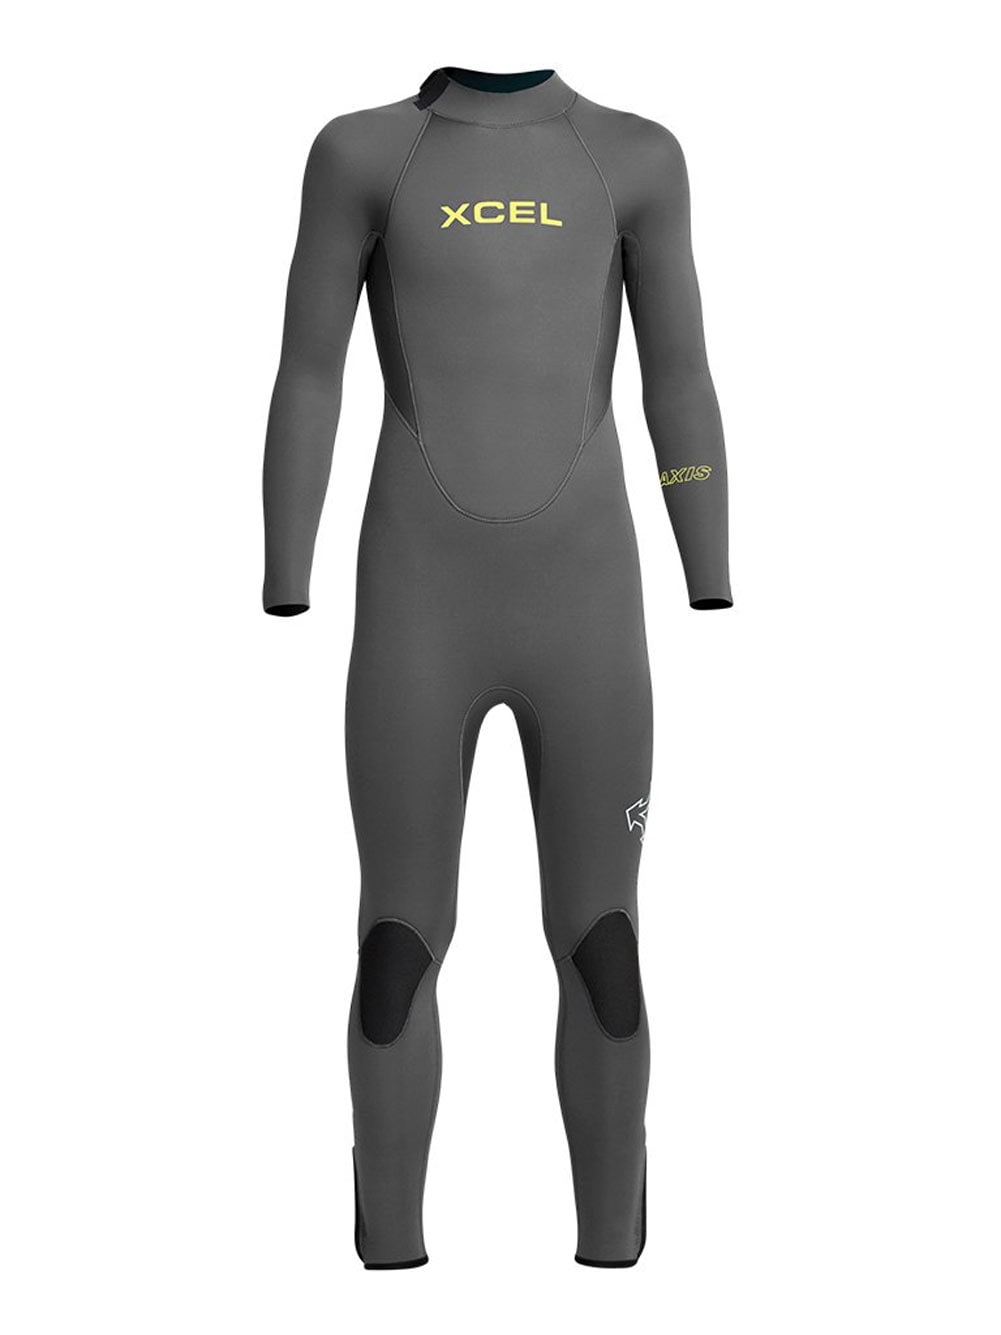 Legacy AXIS 3/2 Junior Wetsuit Shorty Kids Back Zip Entry Boys & Girls Colours Available